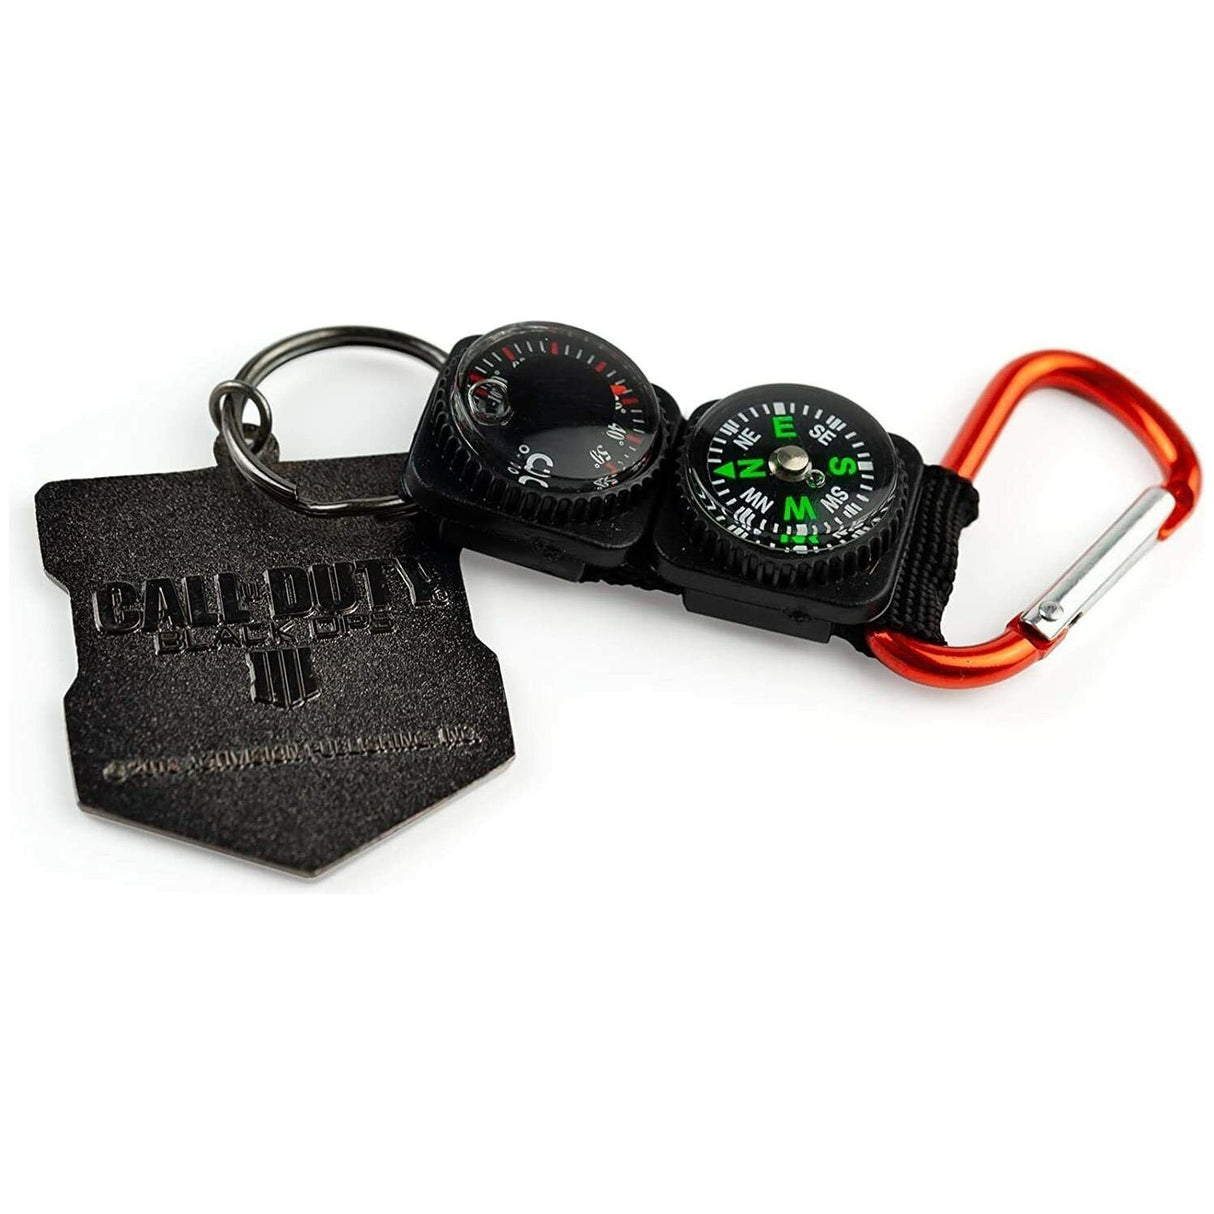 Call of Duty: Black Ops 4 Logo & Keychain Compass Set